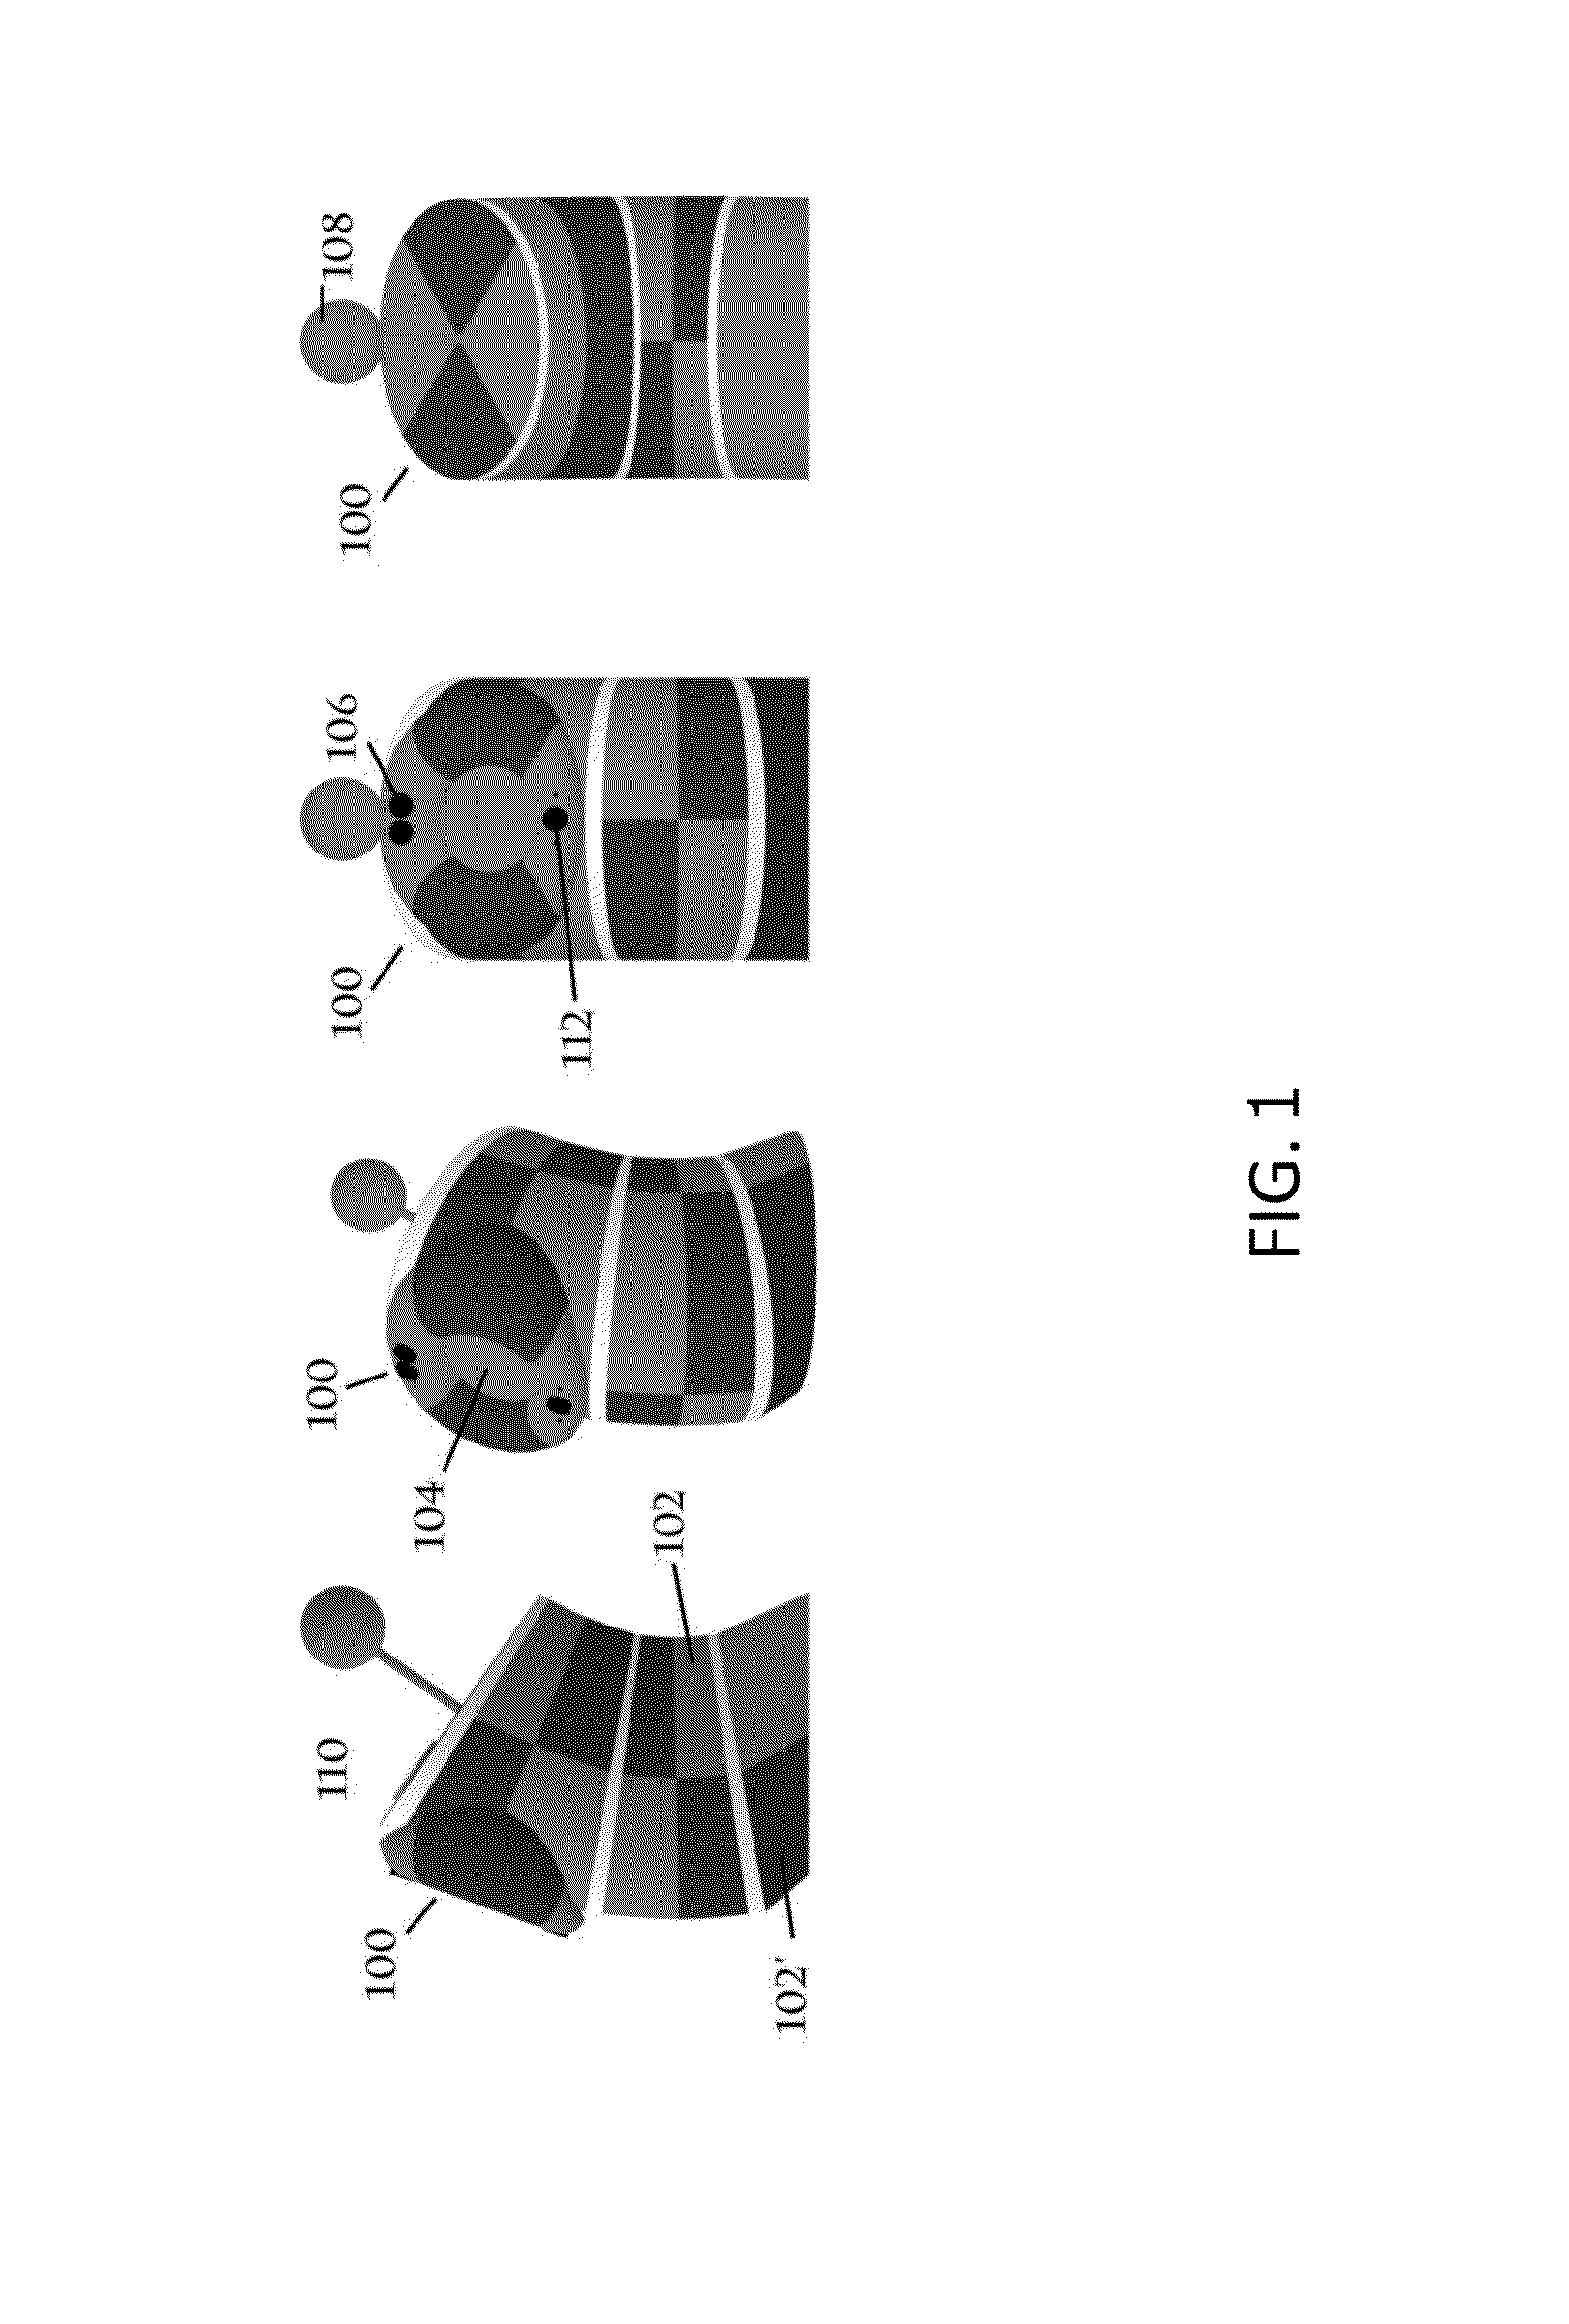 Apparatus and methods for providing a persistent companion device